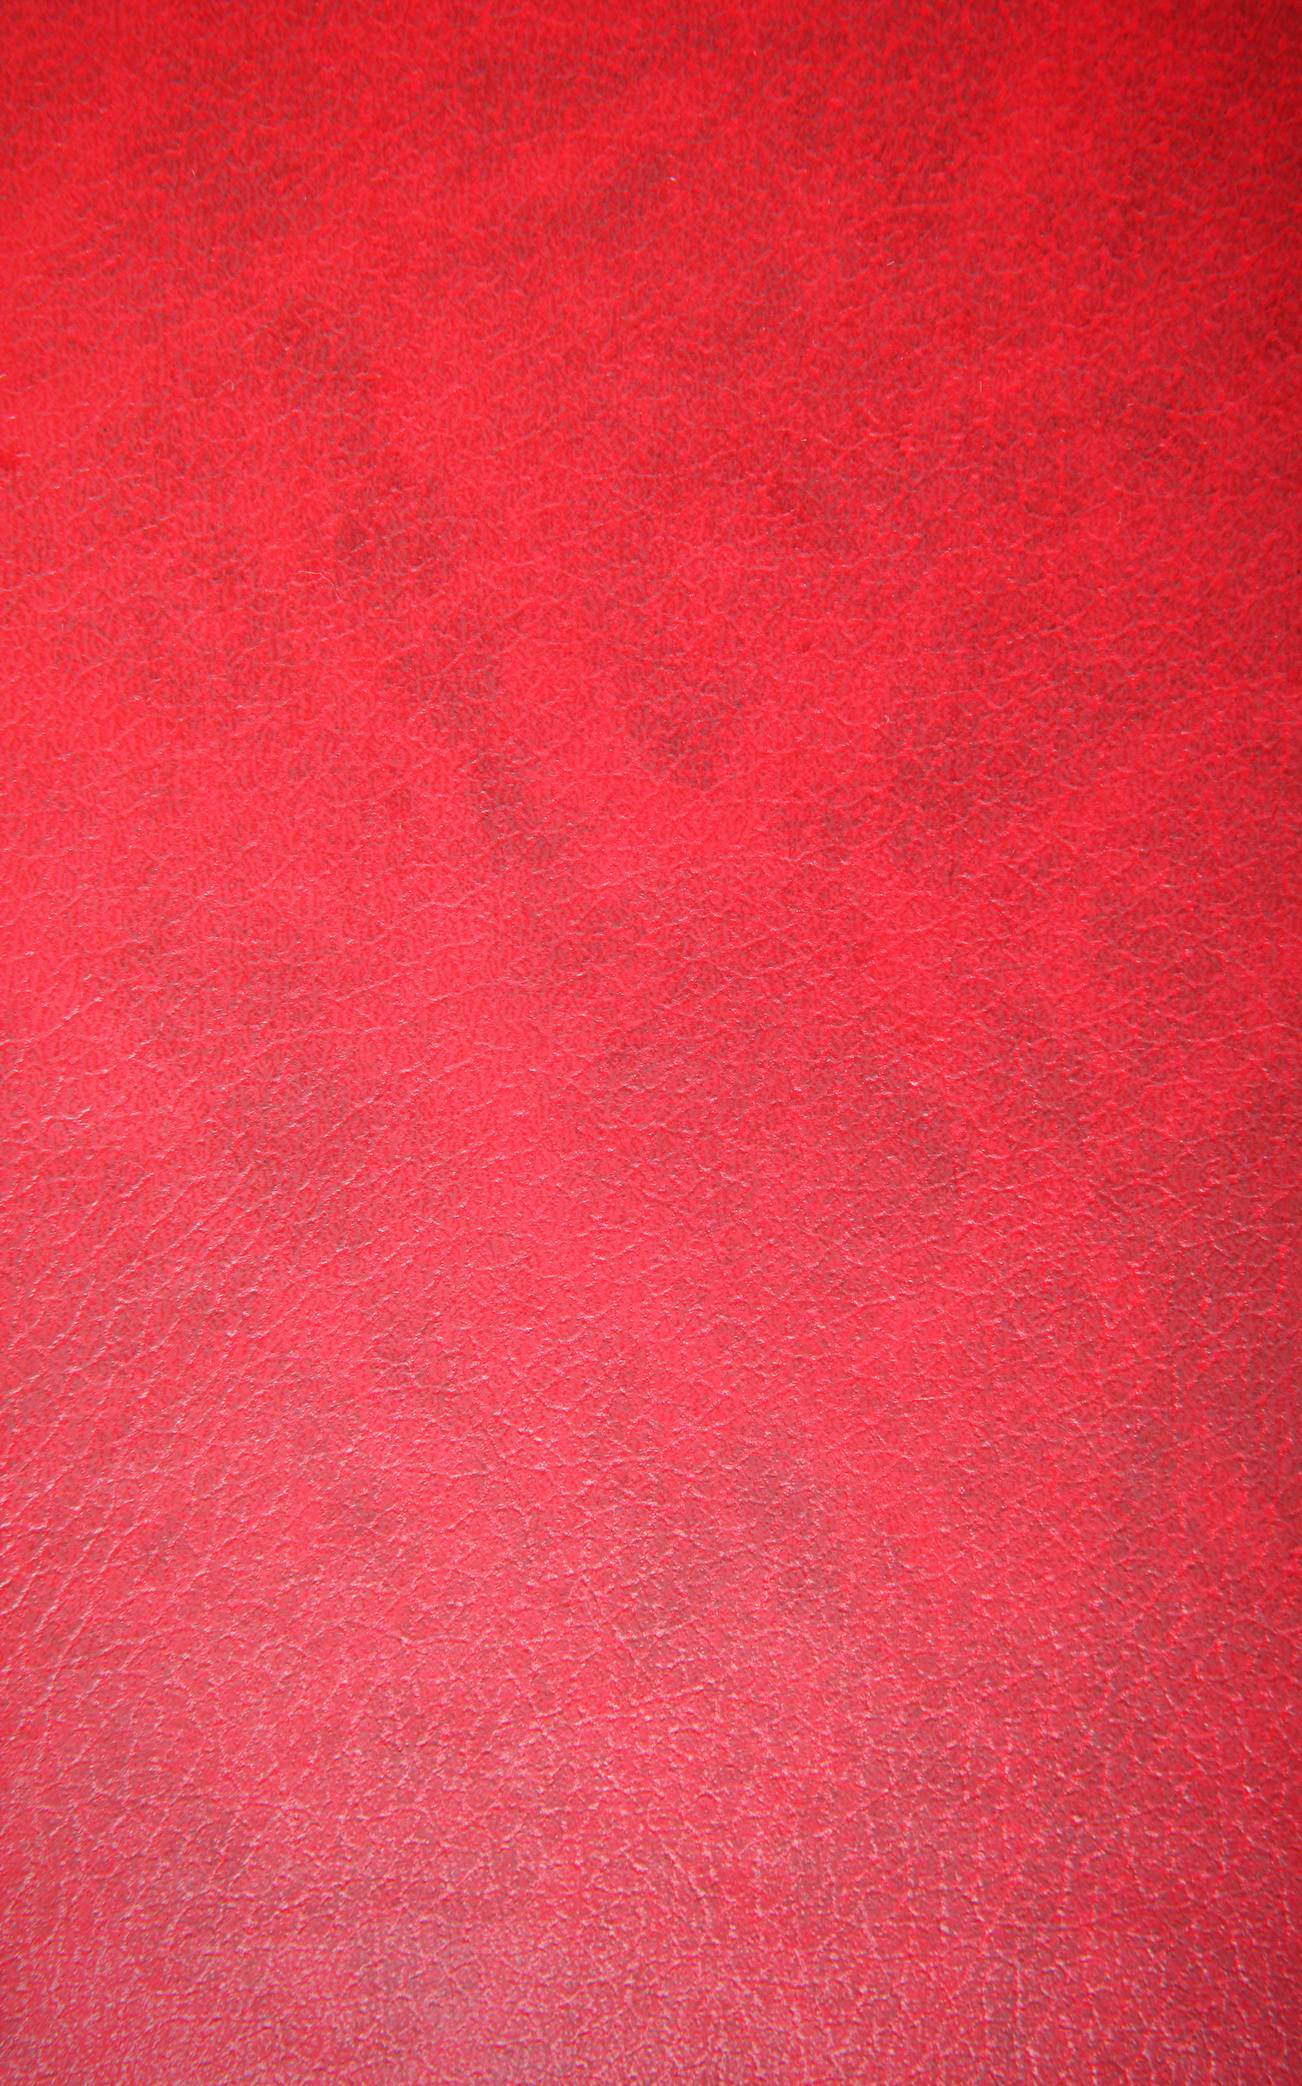 Free photo: Red background - Detail, Material, Purple - Free Download -  Jooinn